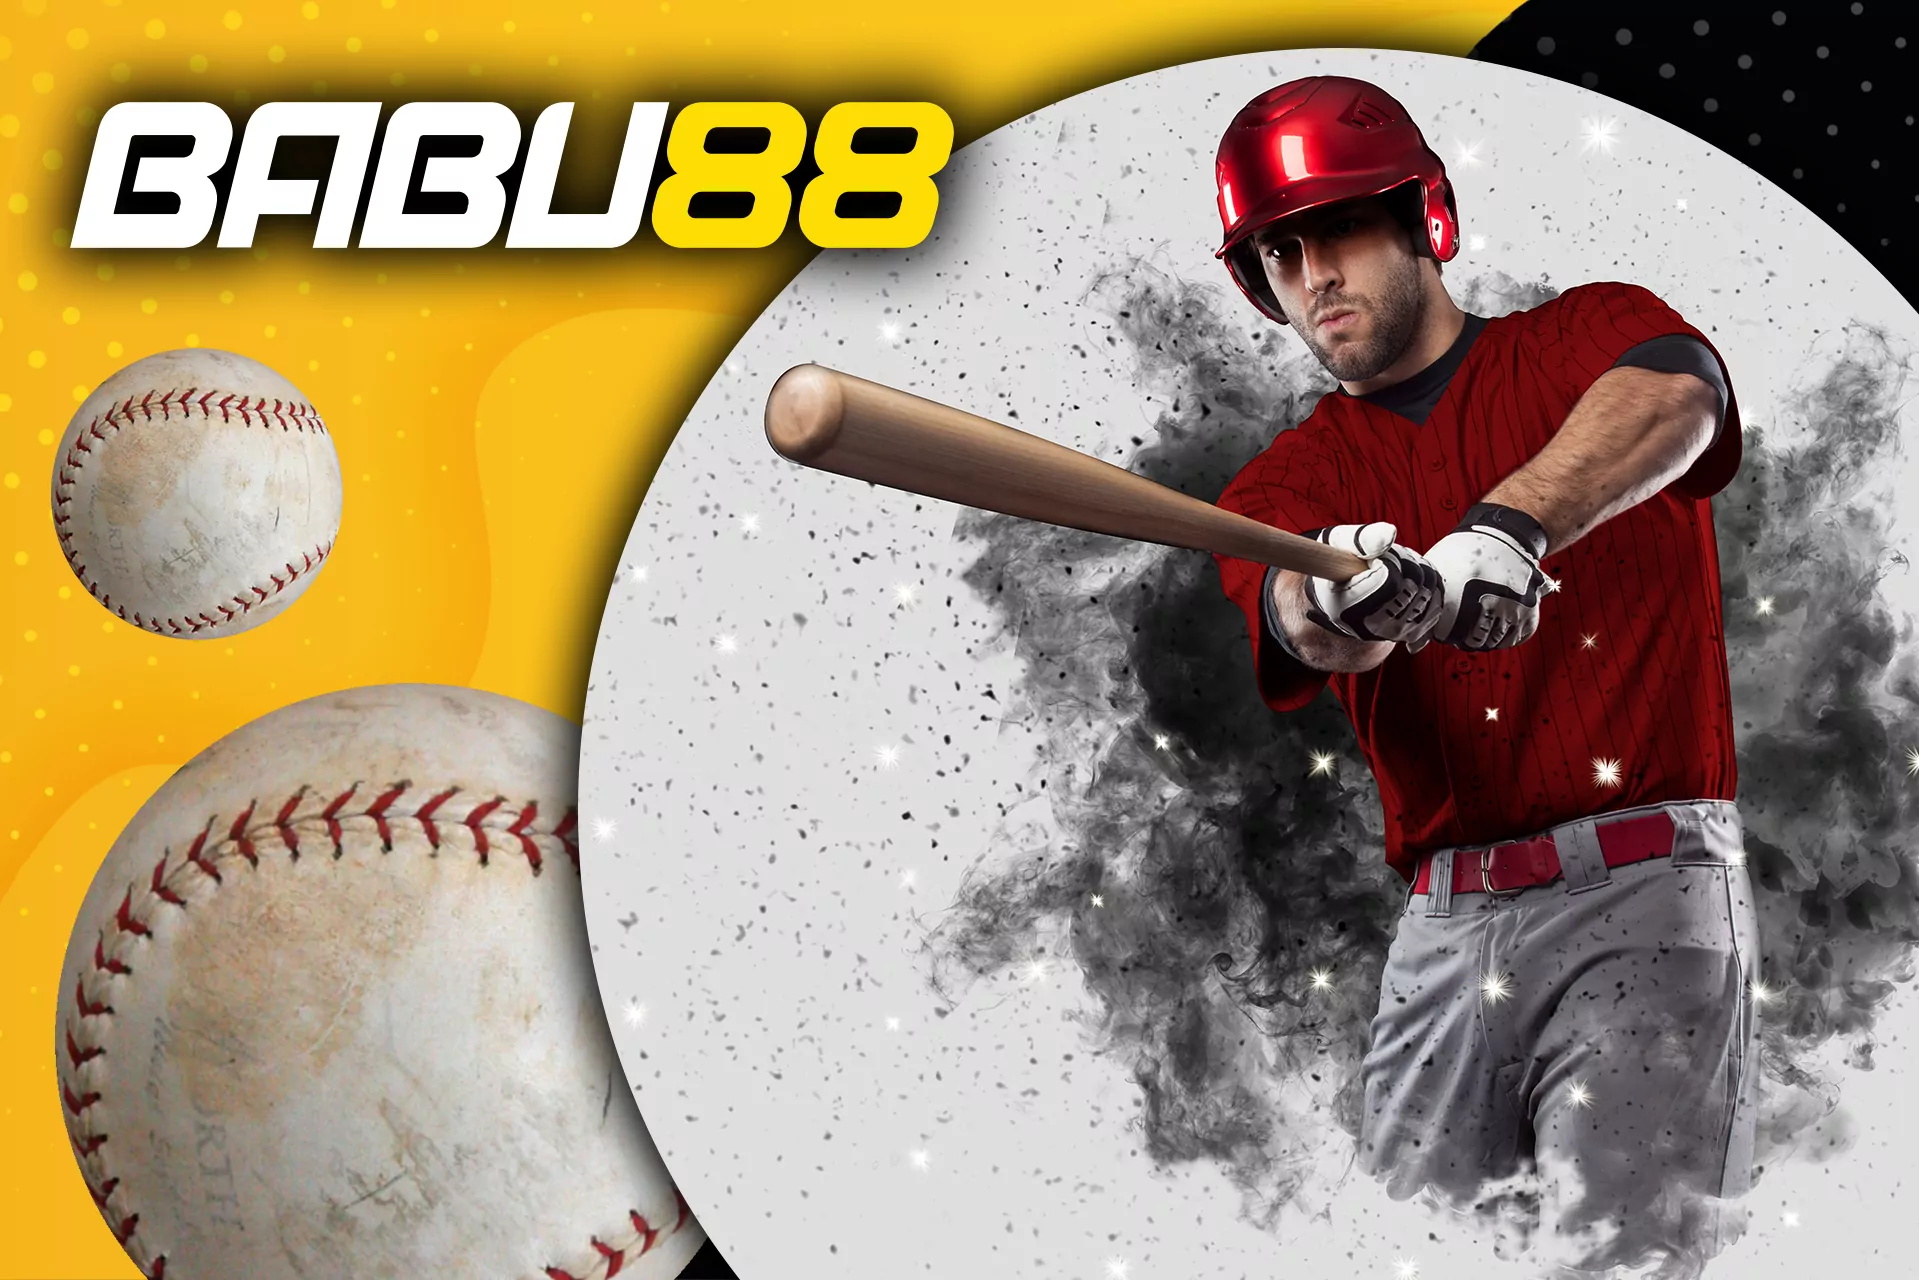 Bet on different baseball leagues and players at Babu88.